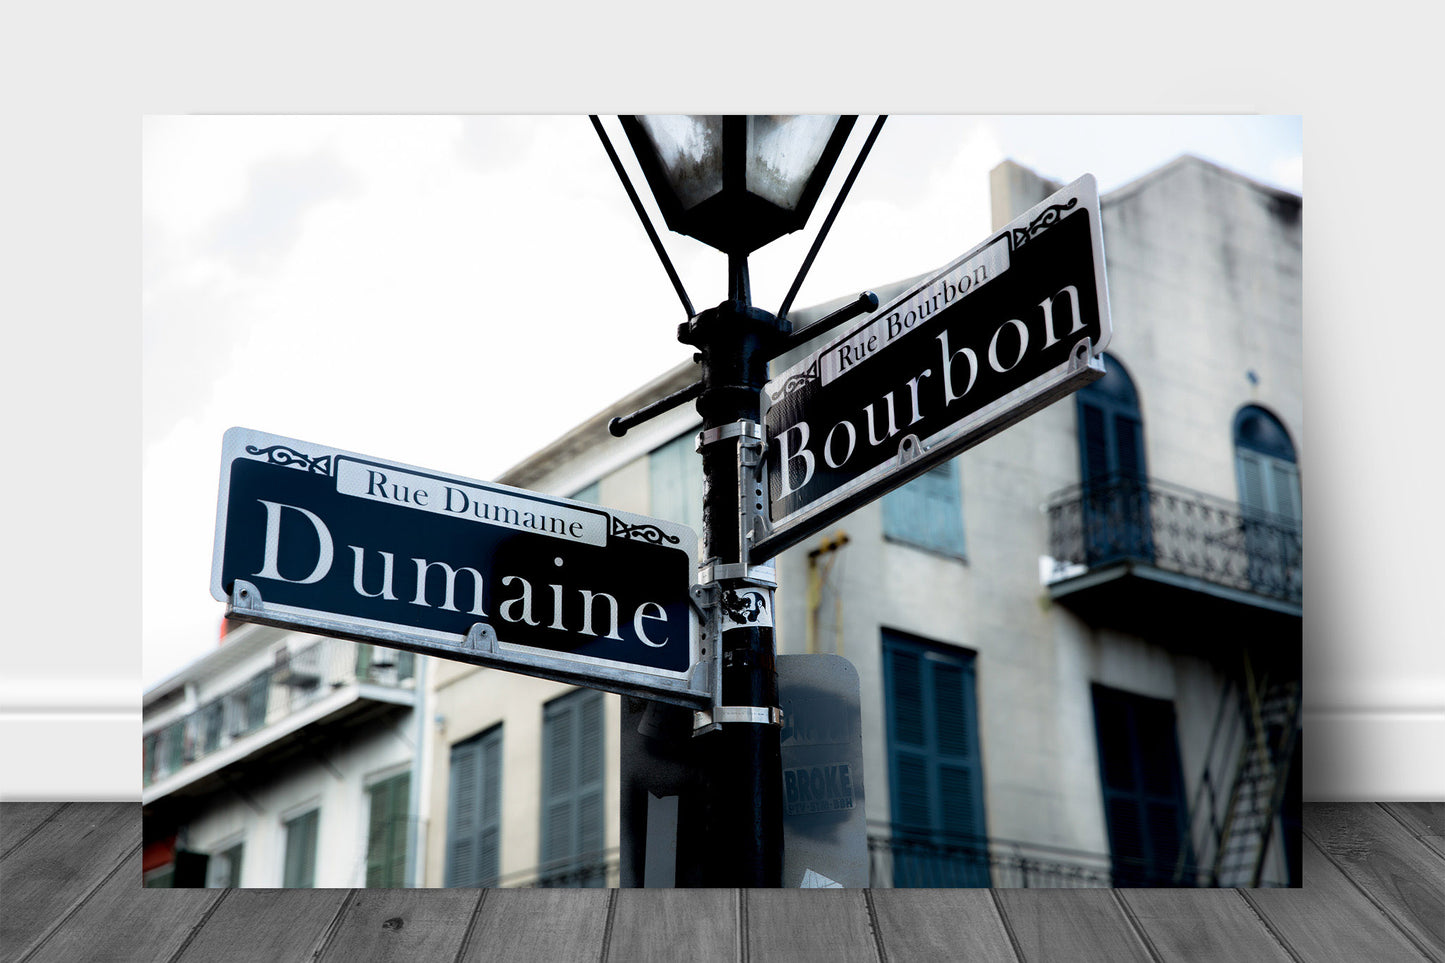 Southern metal print of street signs on a lamp post at the intersection of Dumaine and Bourbon Street in the New Orleans French Quarter by Sean Ramsey of Southern Plains Photography.